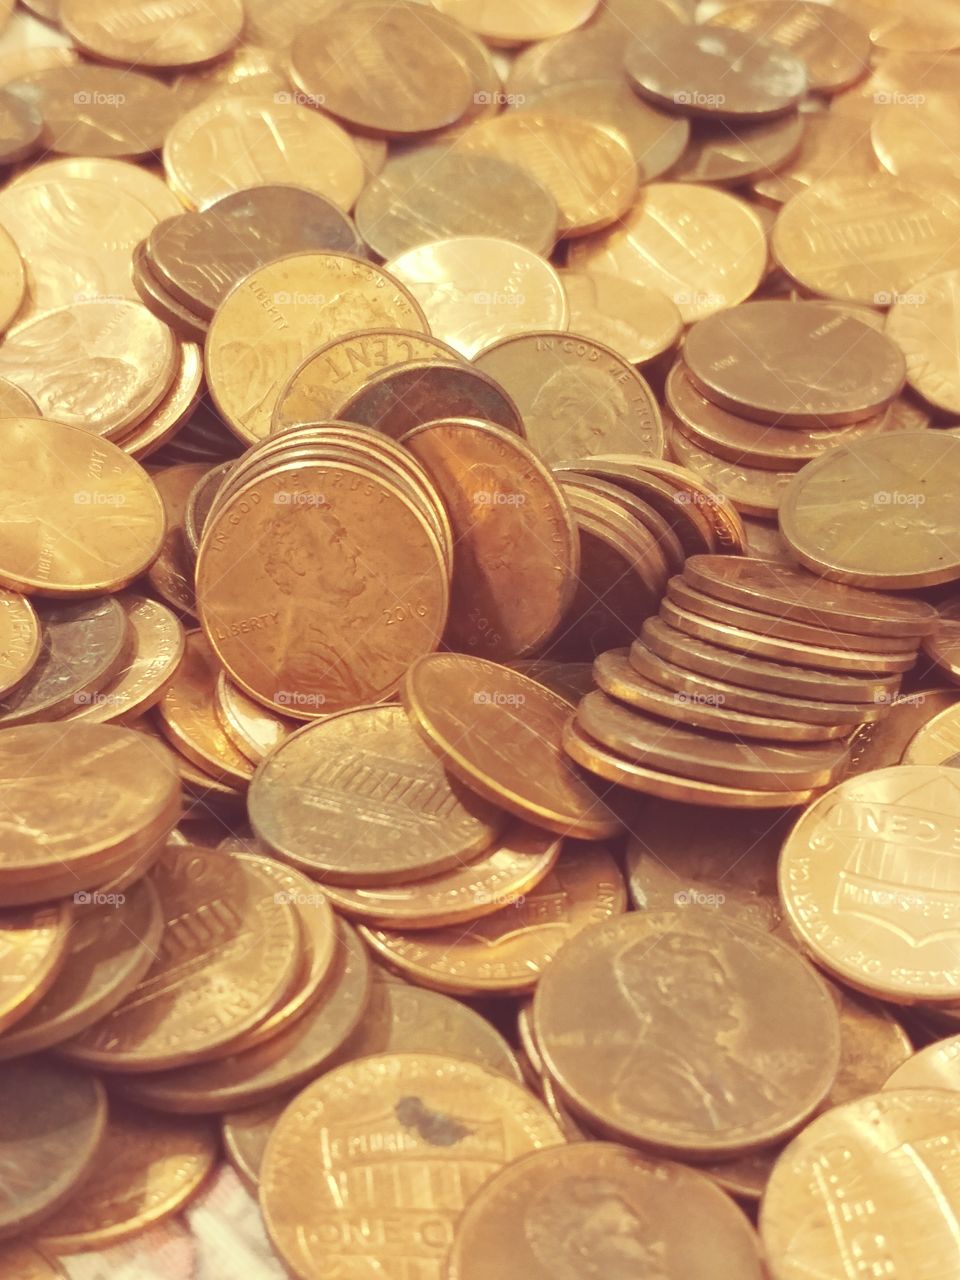 Finding gold in Lincoln cents